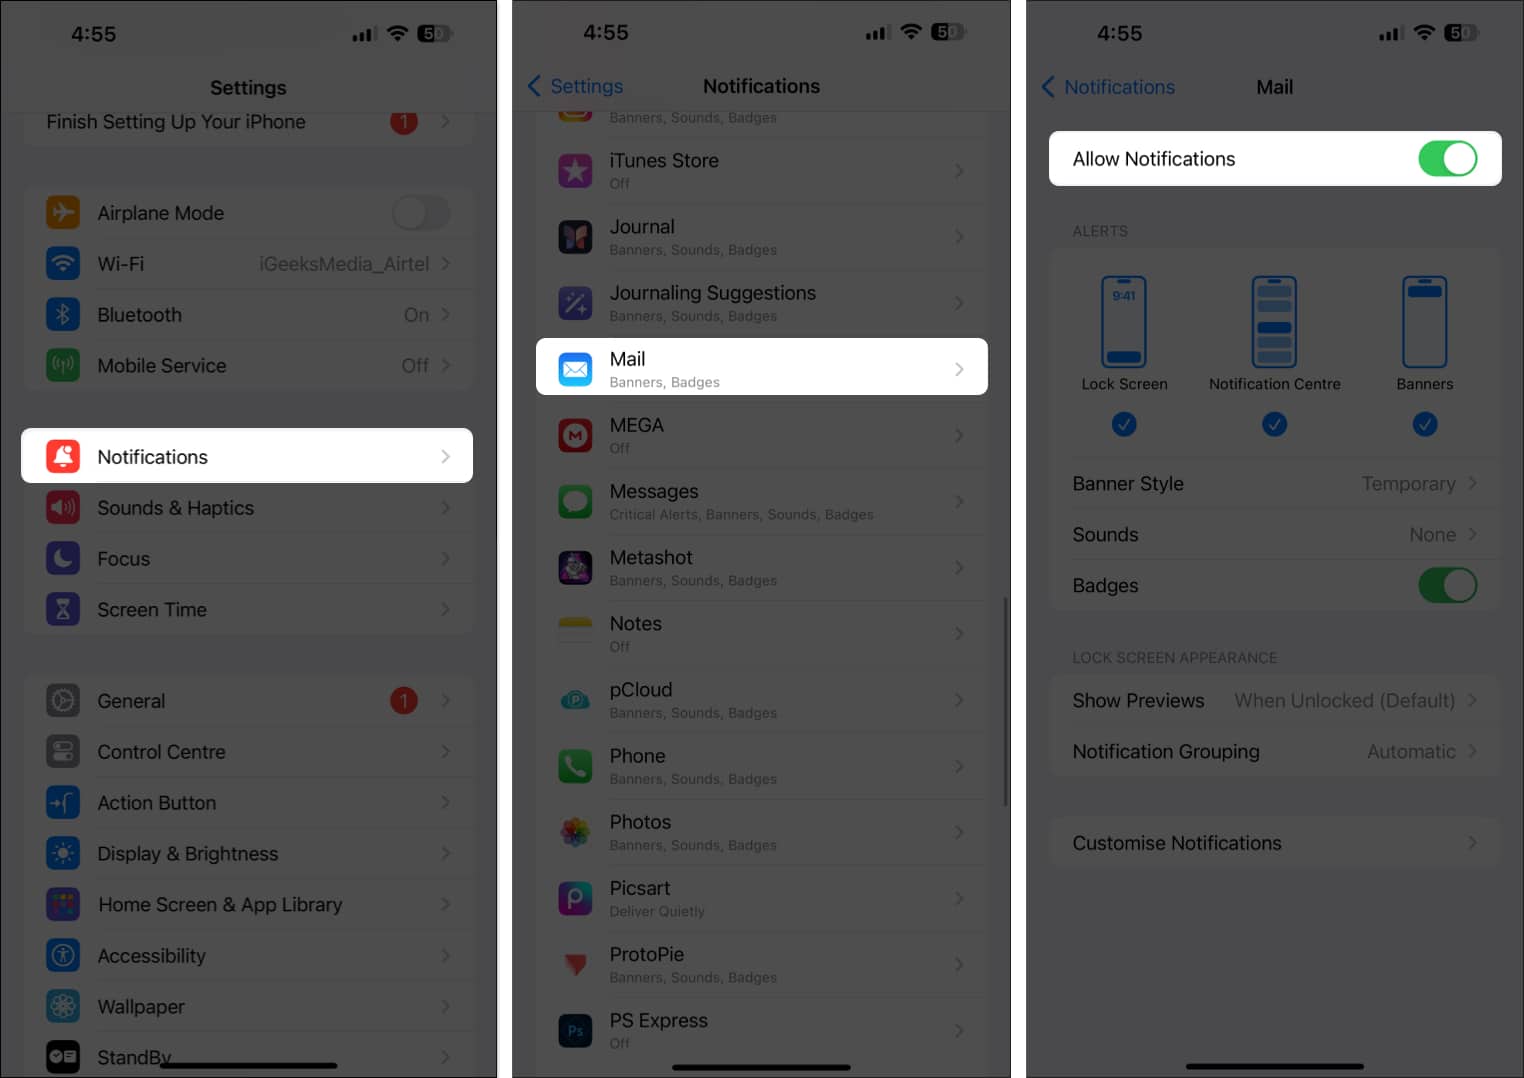 Select Notifications, tap on Mail app and toggle on Allow Notifications